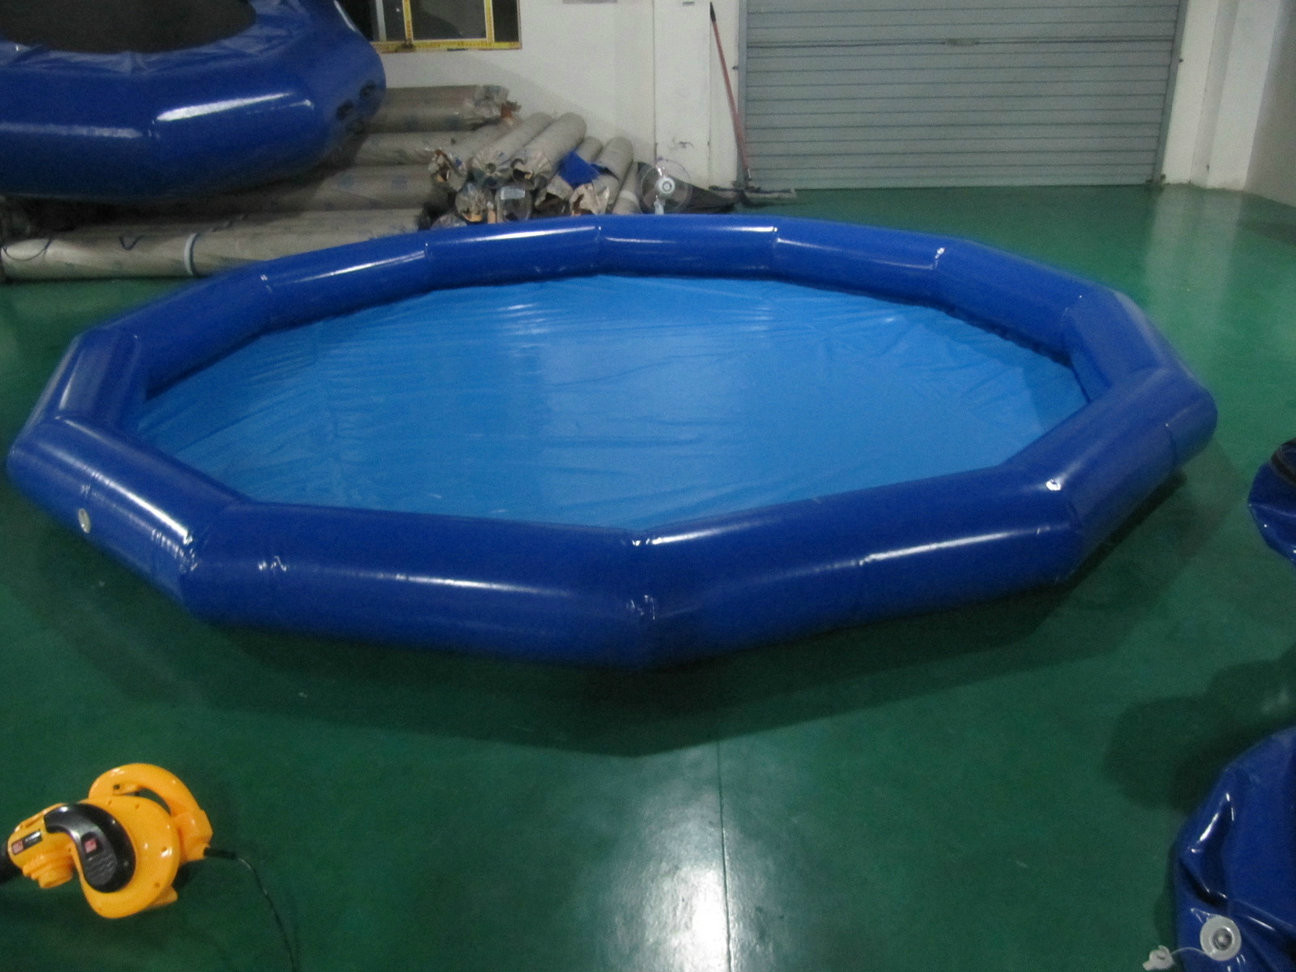 Round Inflatable Pool